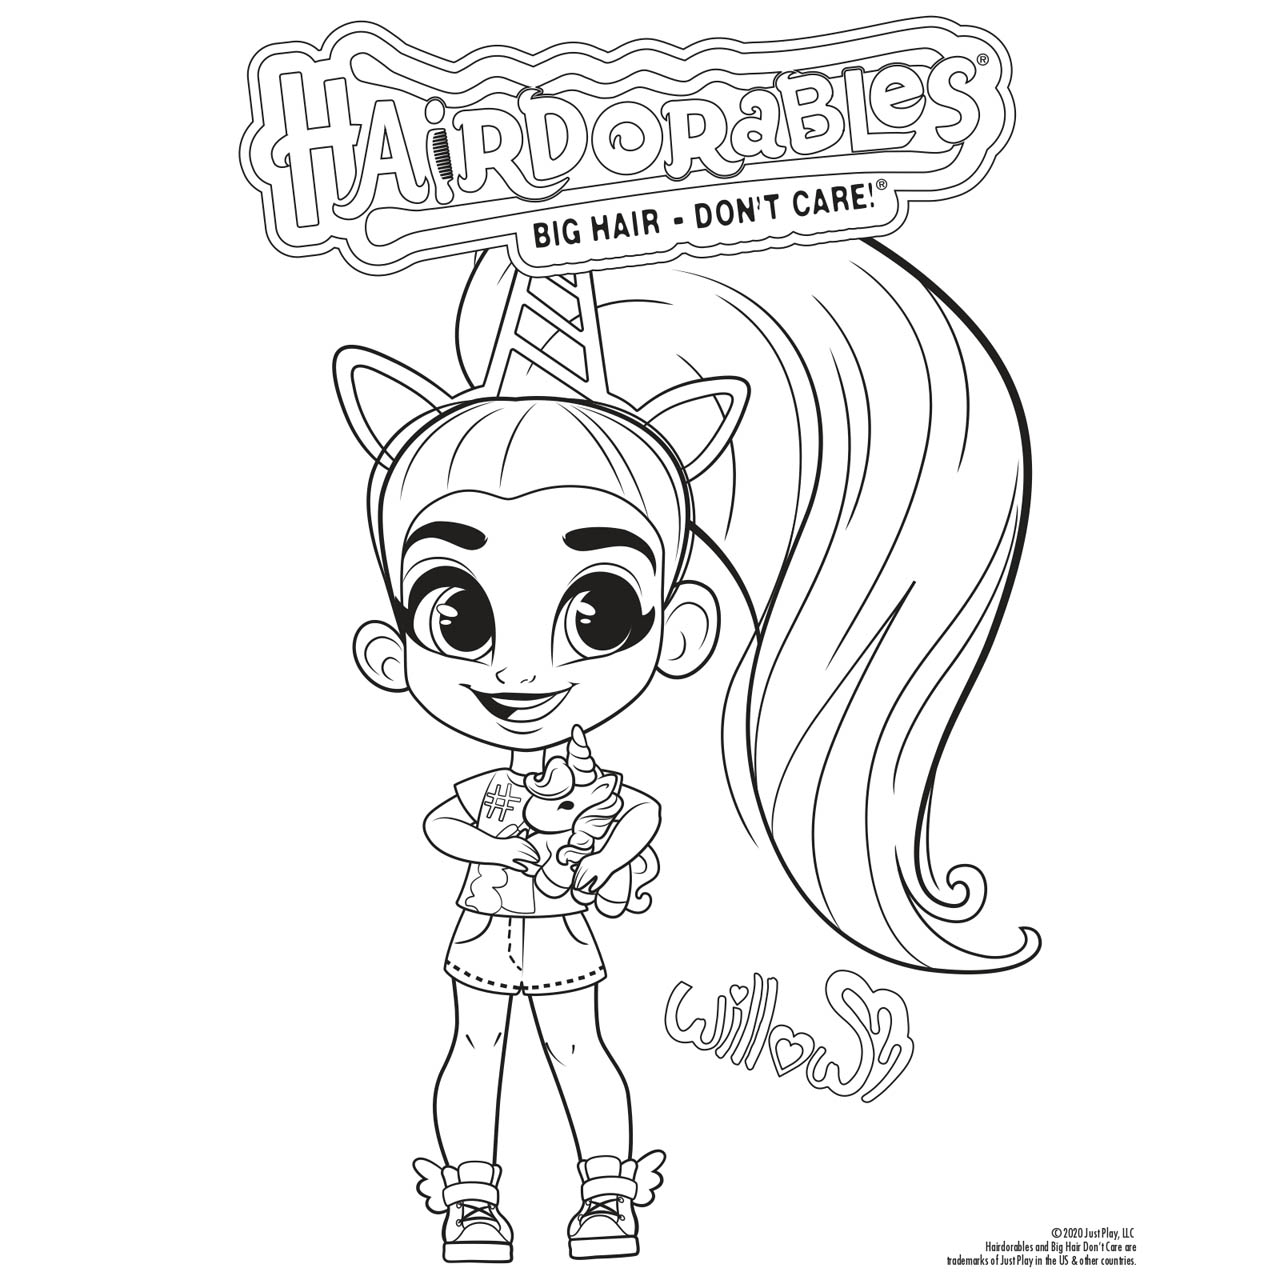 Free Hairdorables Unicorn Coloring Pages printable